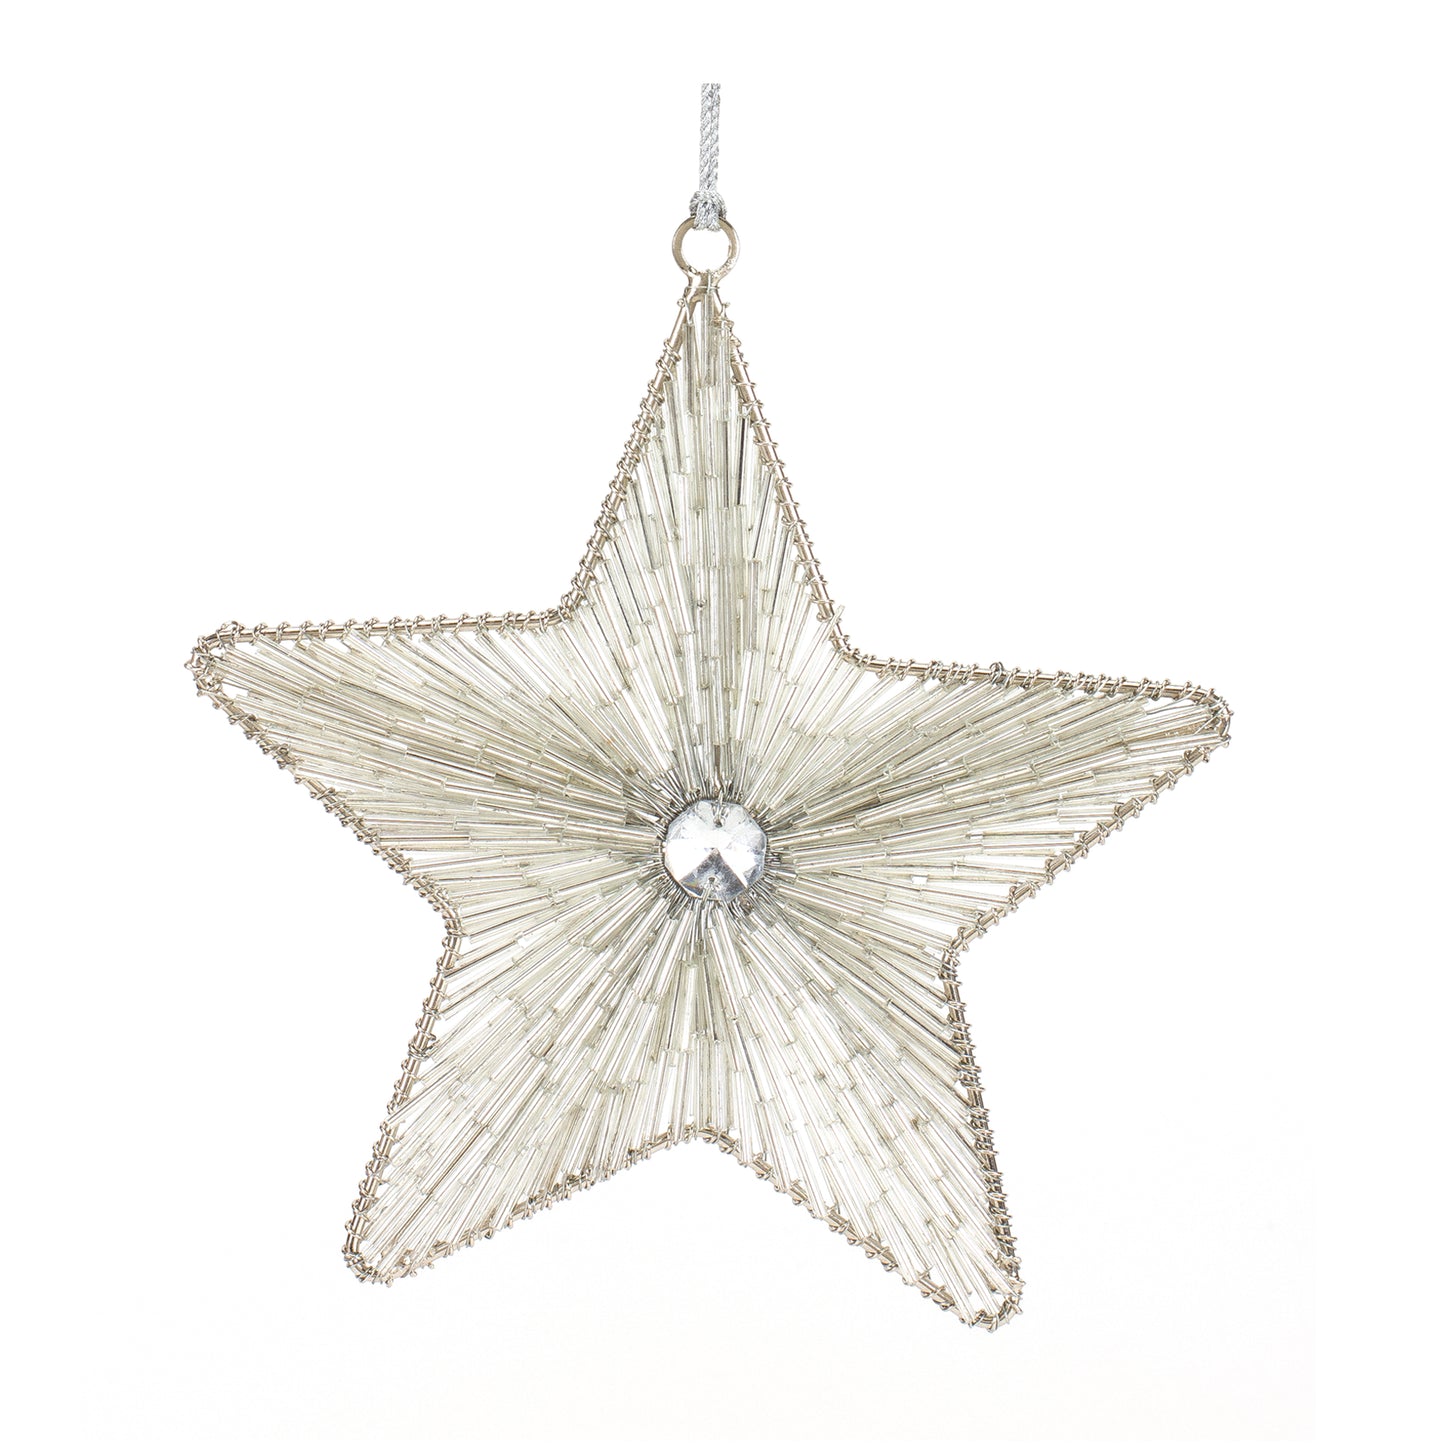 4"H or 5.75"H Star Ornament Iron/Glass Bead Ornament